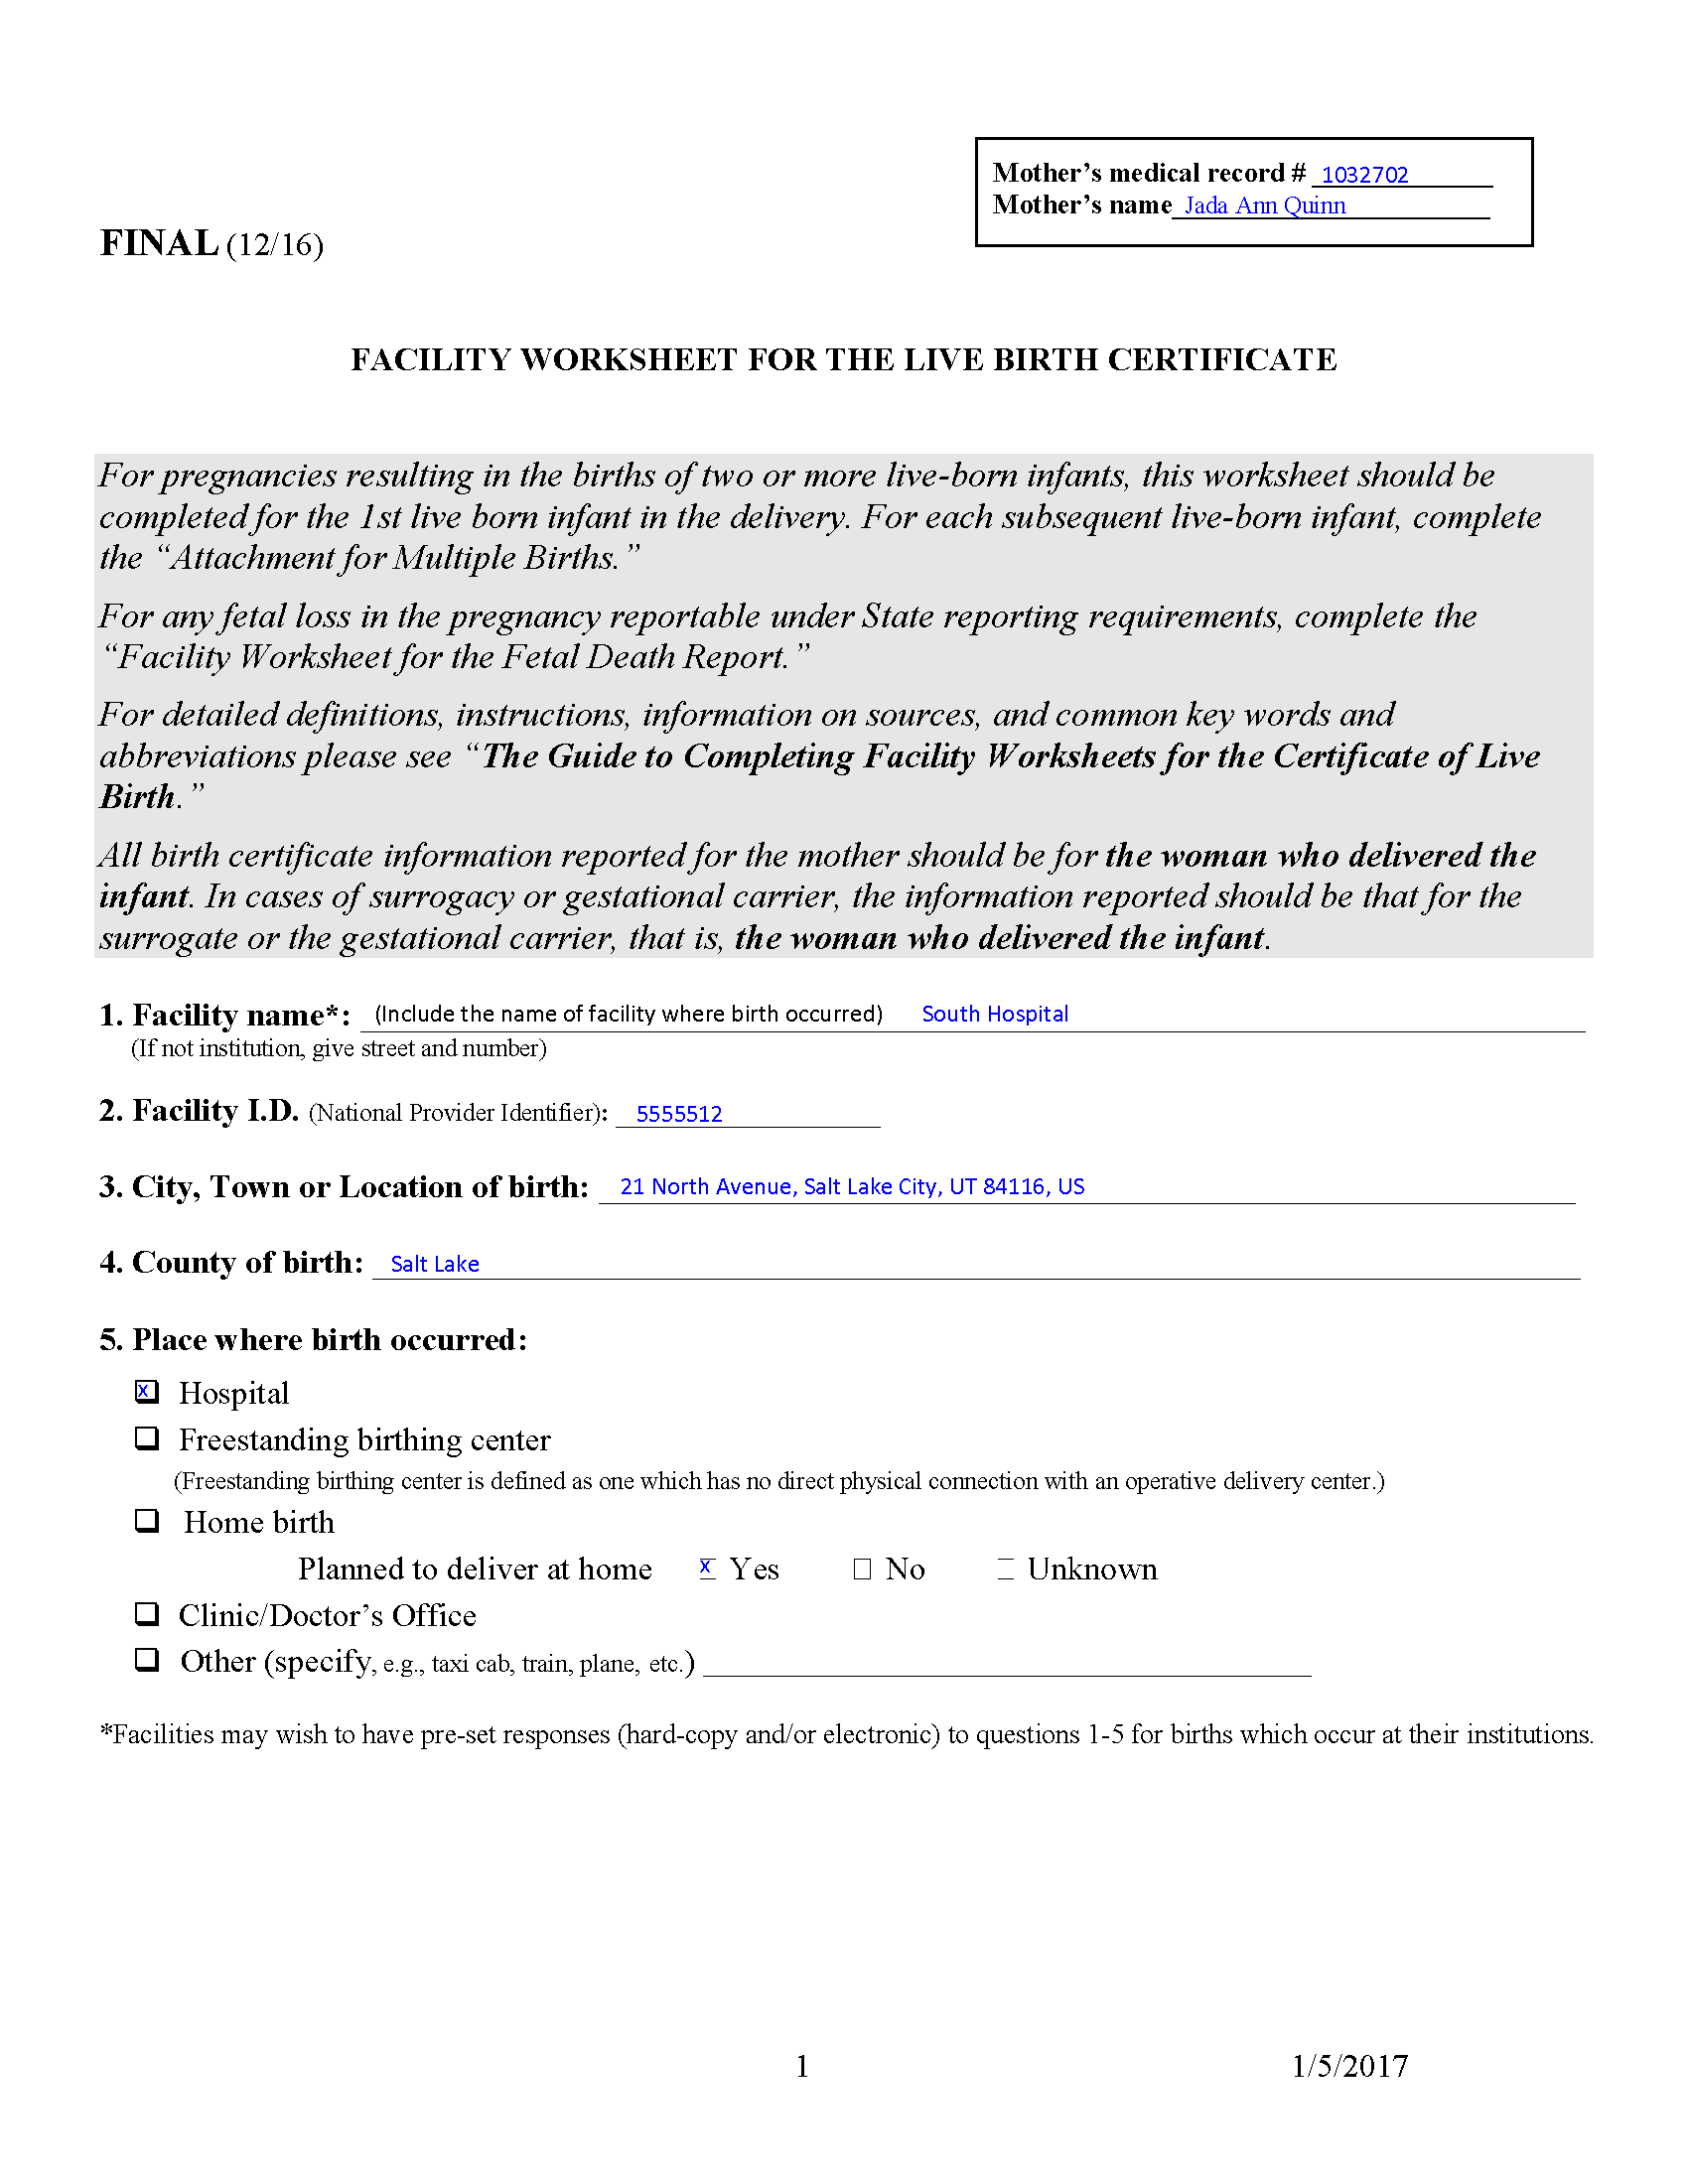 Example Facility Worksheet for Live Birth Certificate for Baby G Quinn - p1